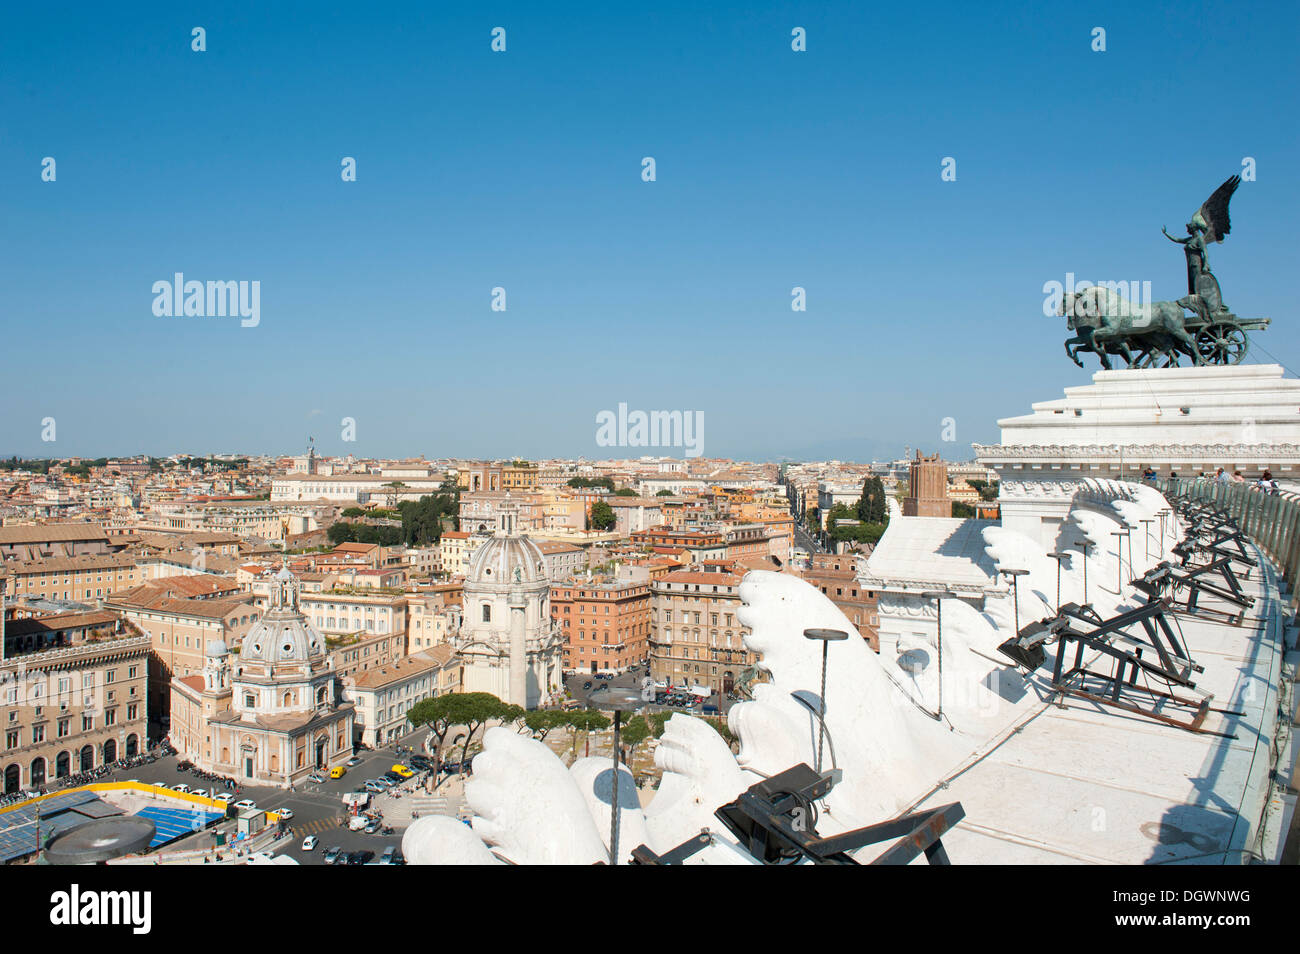 National Monument to Victor Emmanuel II, Monumento Nazionale a Vittorio Emanuele II, Quadriga, view from the roof to Piazza Stock Photo